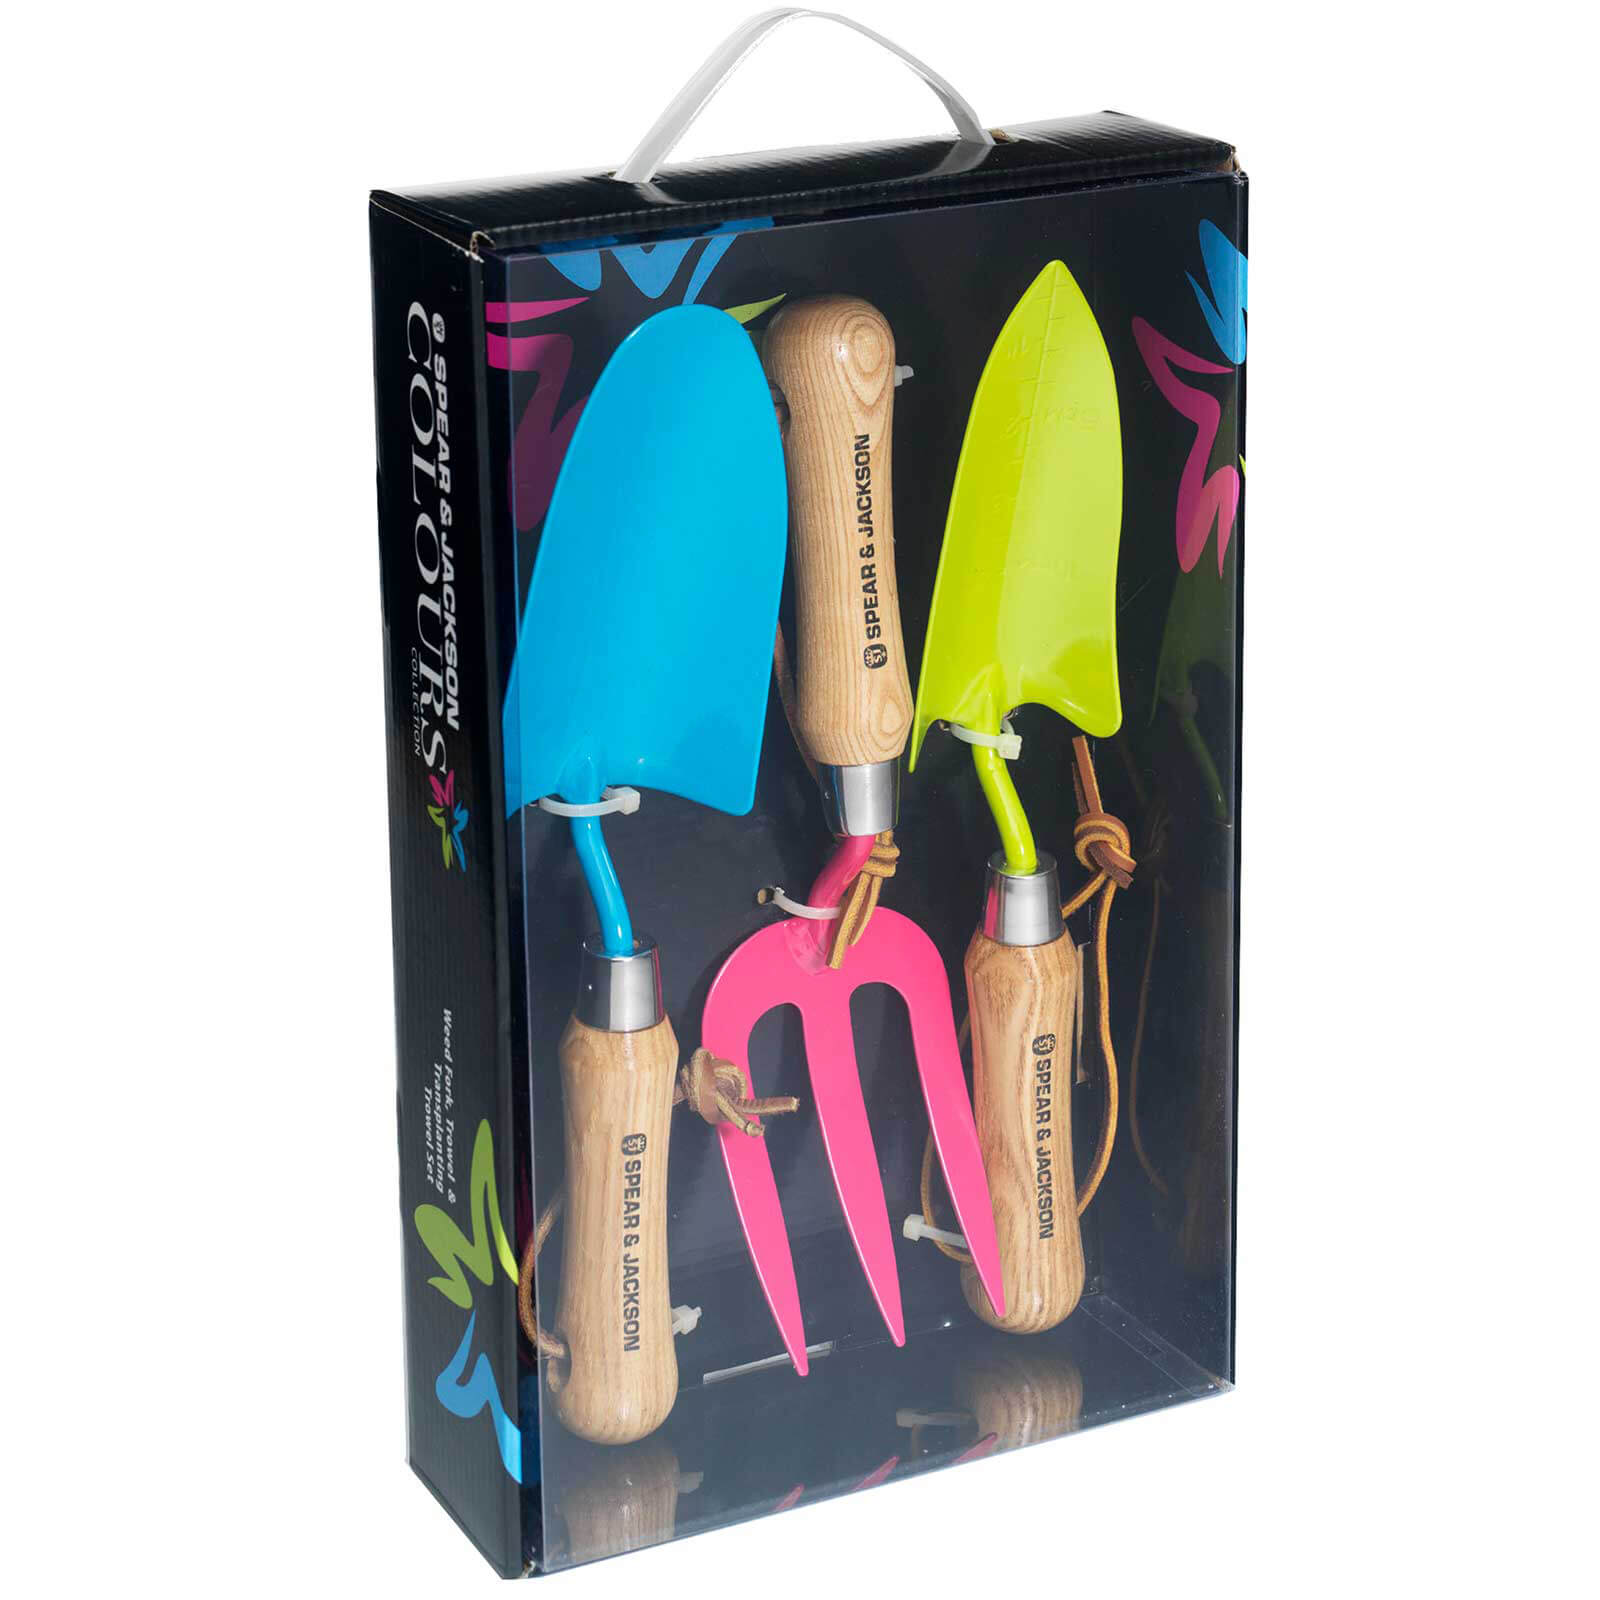 Spear and Jackson Colours 3 Piece Carbon Steel Garden Tool Set